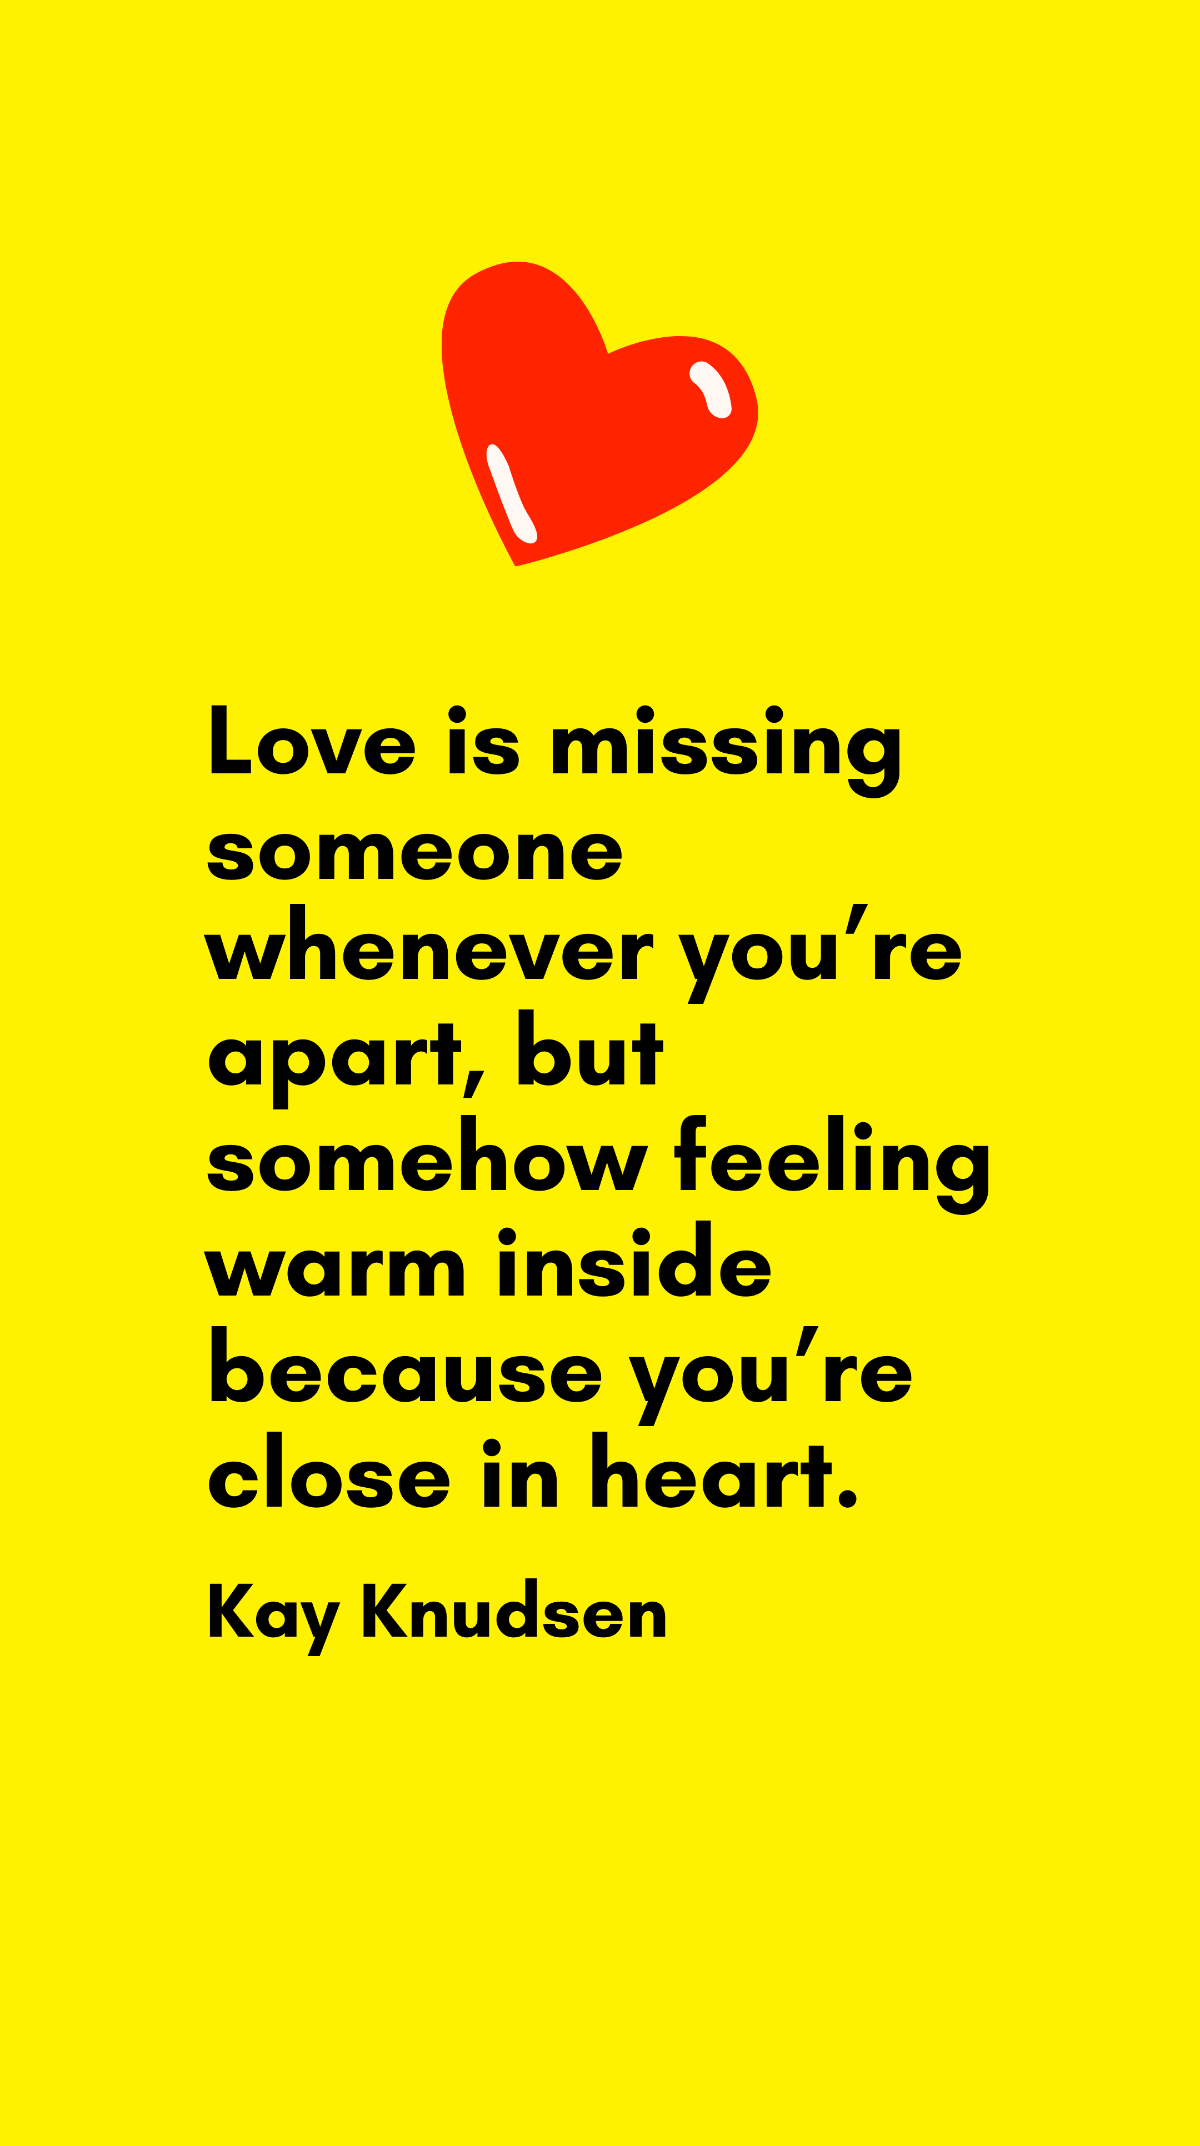 Kay Knudsen - Love is missing someone whenever you’re apart, but somehow feeling warm inside because you’re close in heart. Template